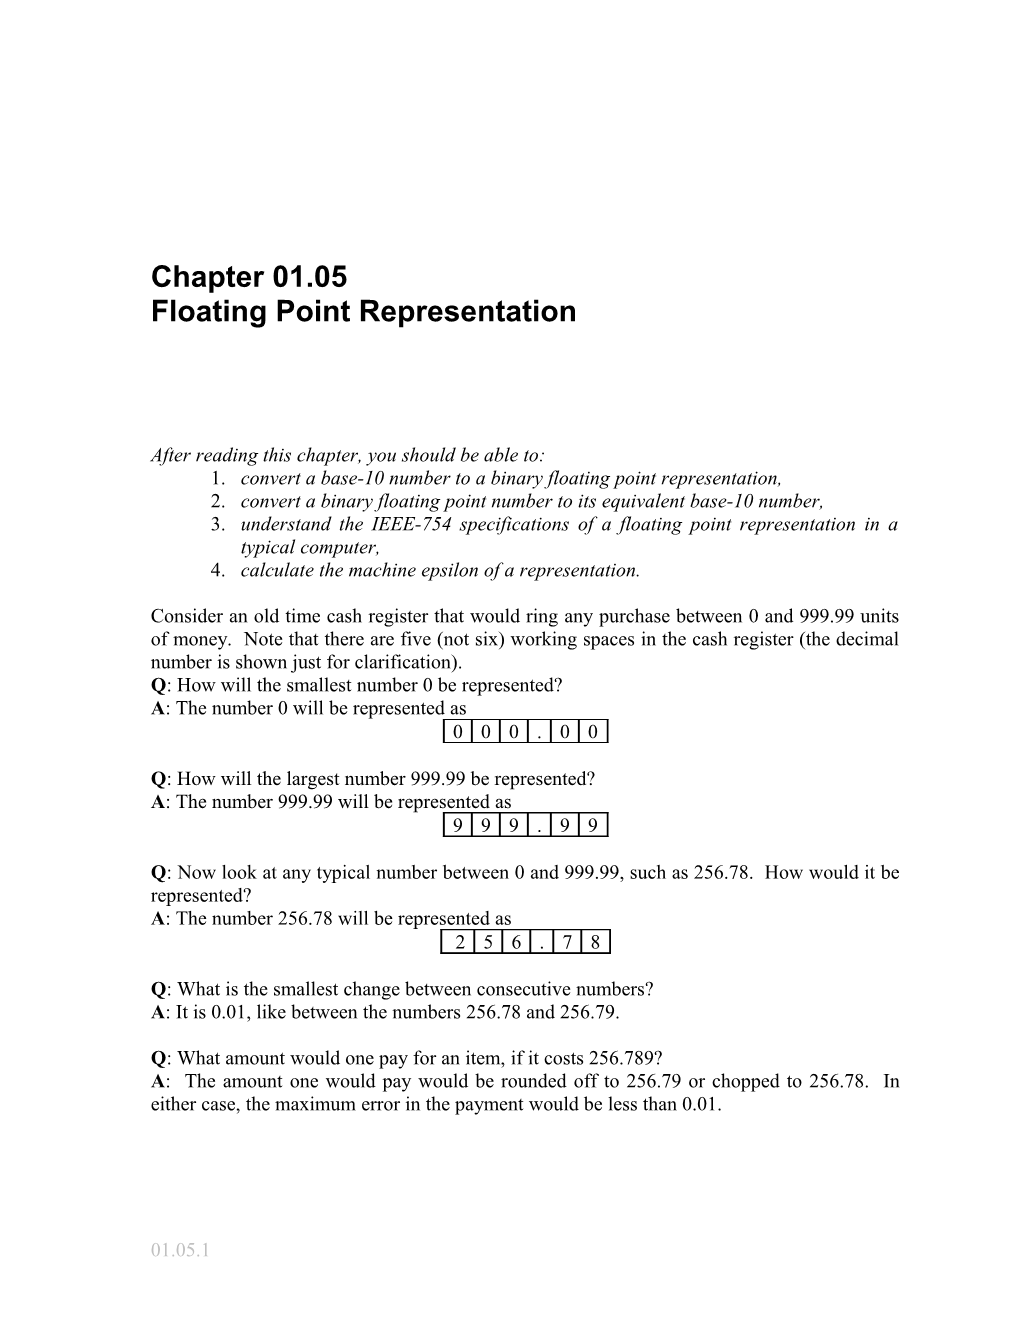 Text Book Notes on Floating Point Representation